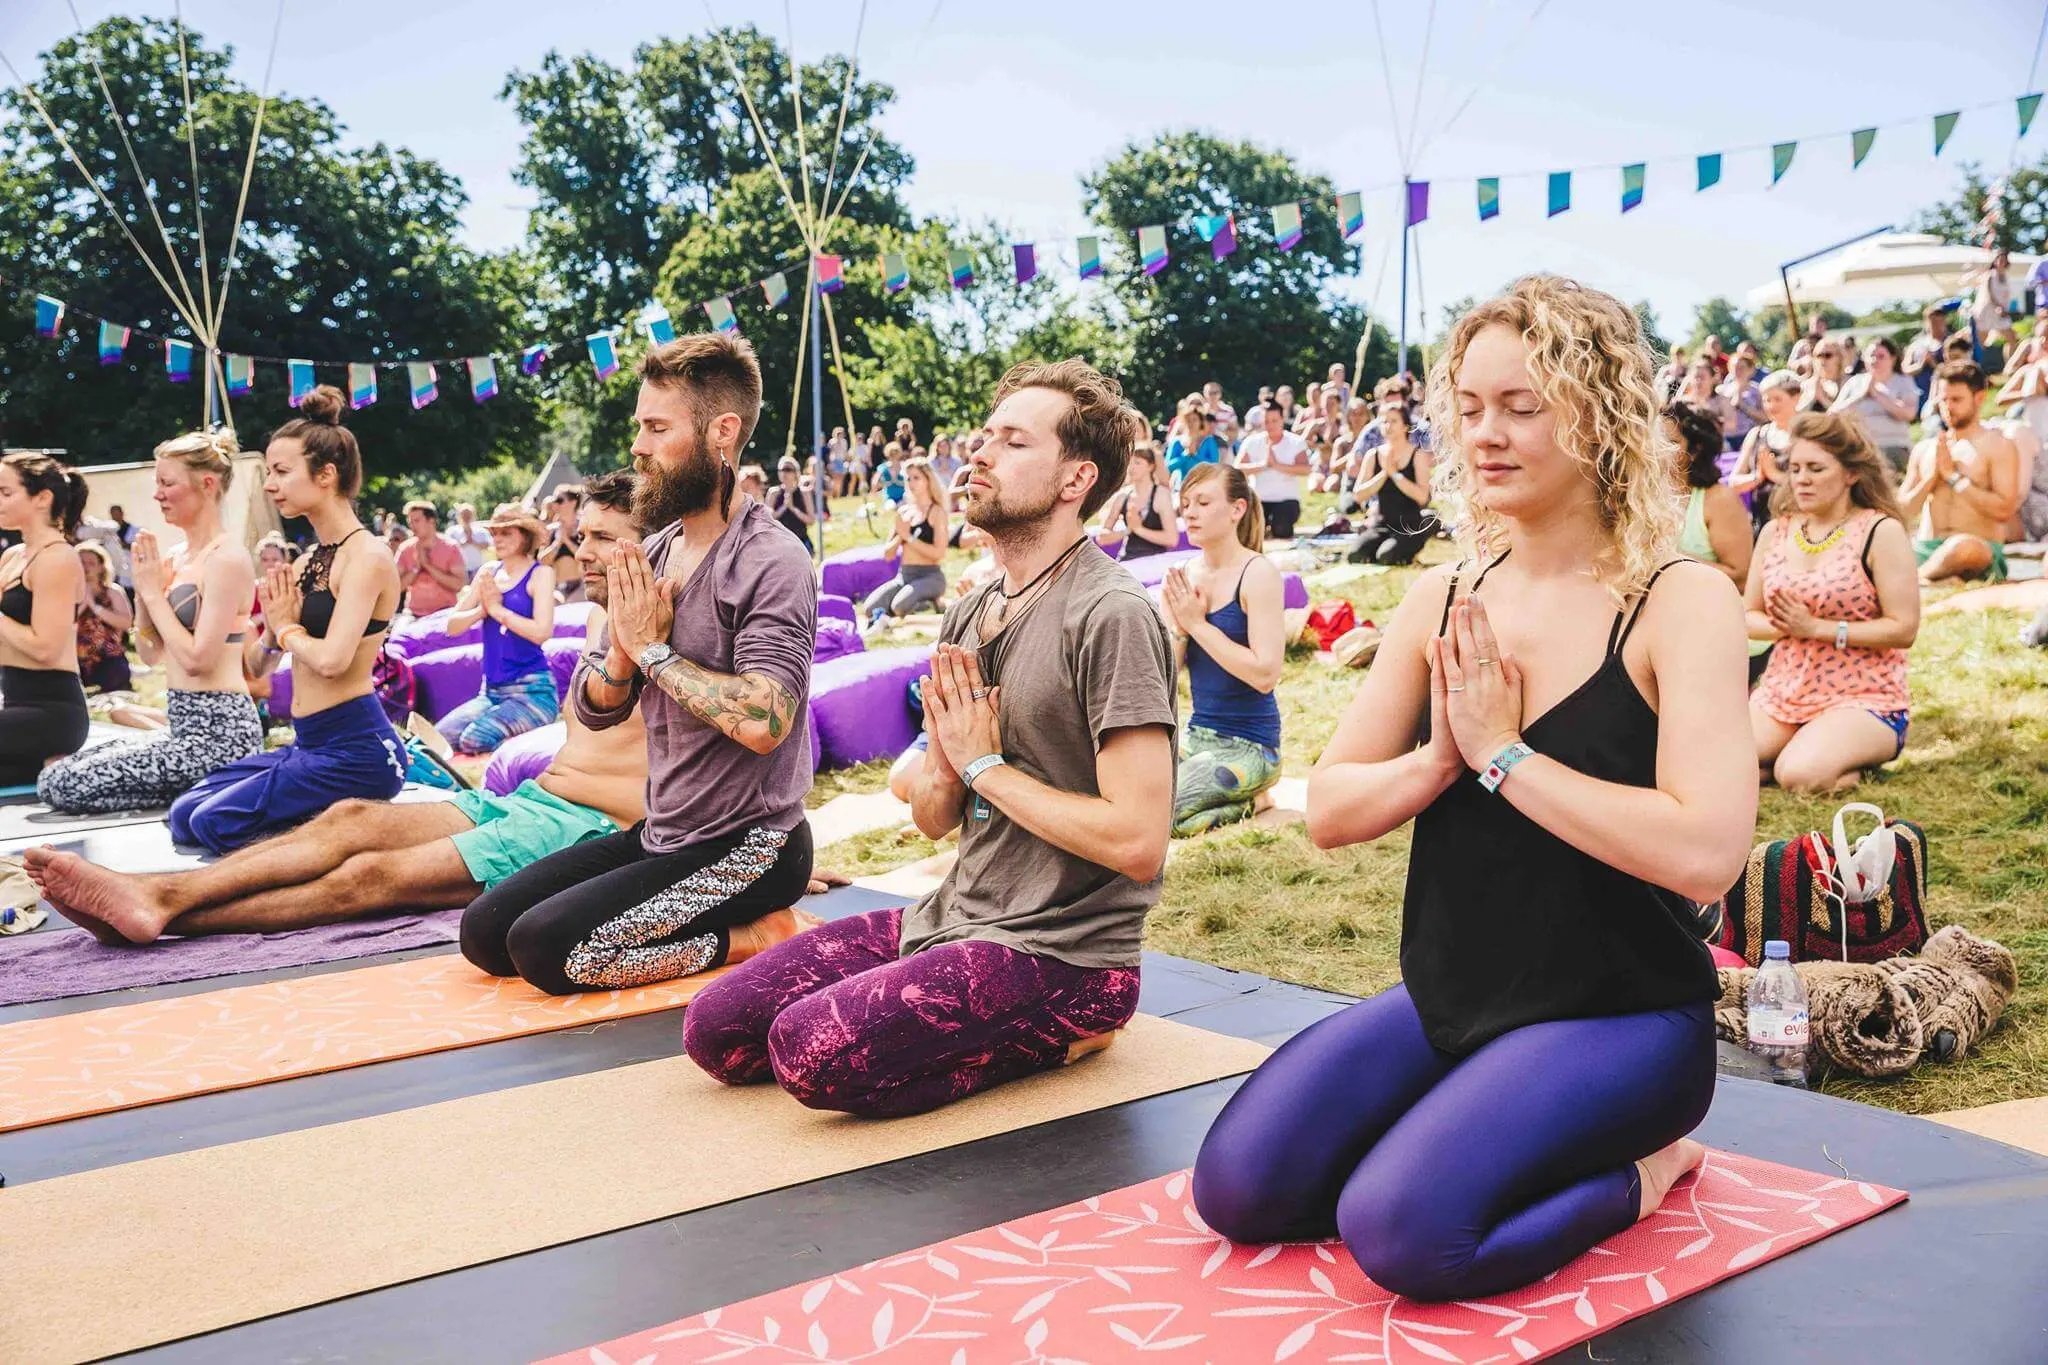 Wilderness Festival for yoga and mindfulness